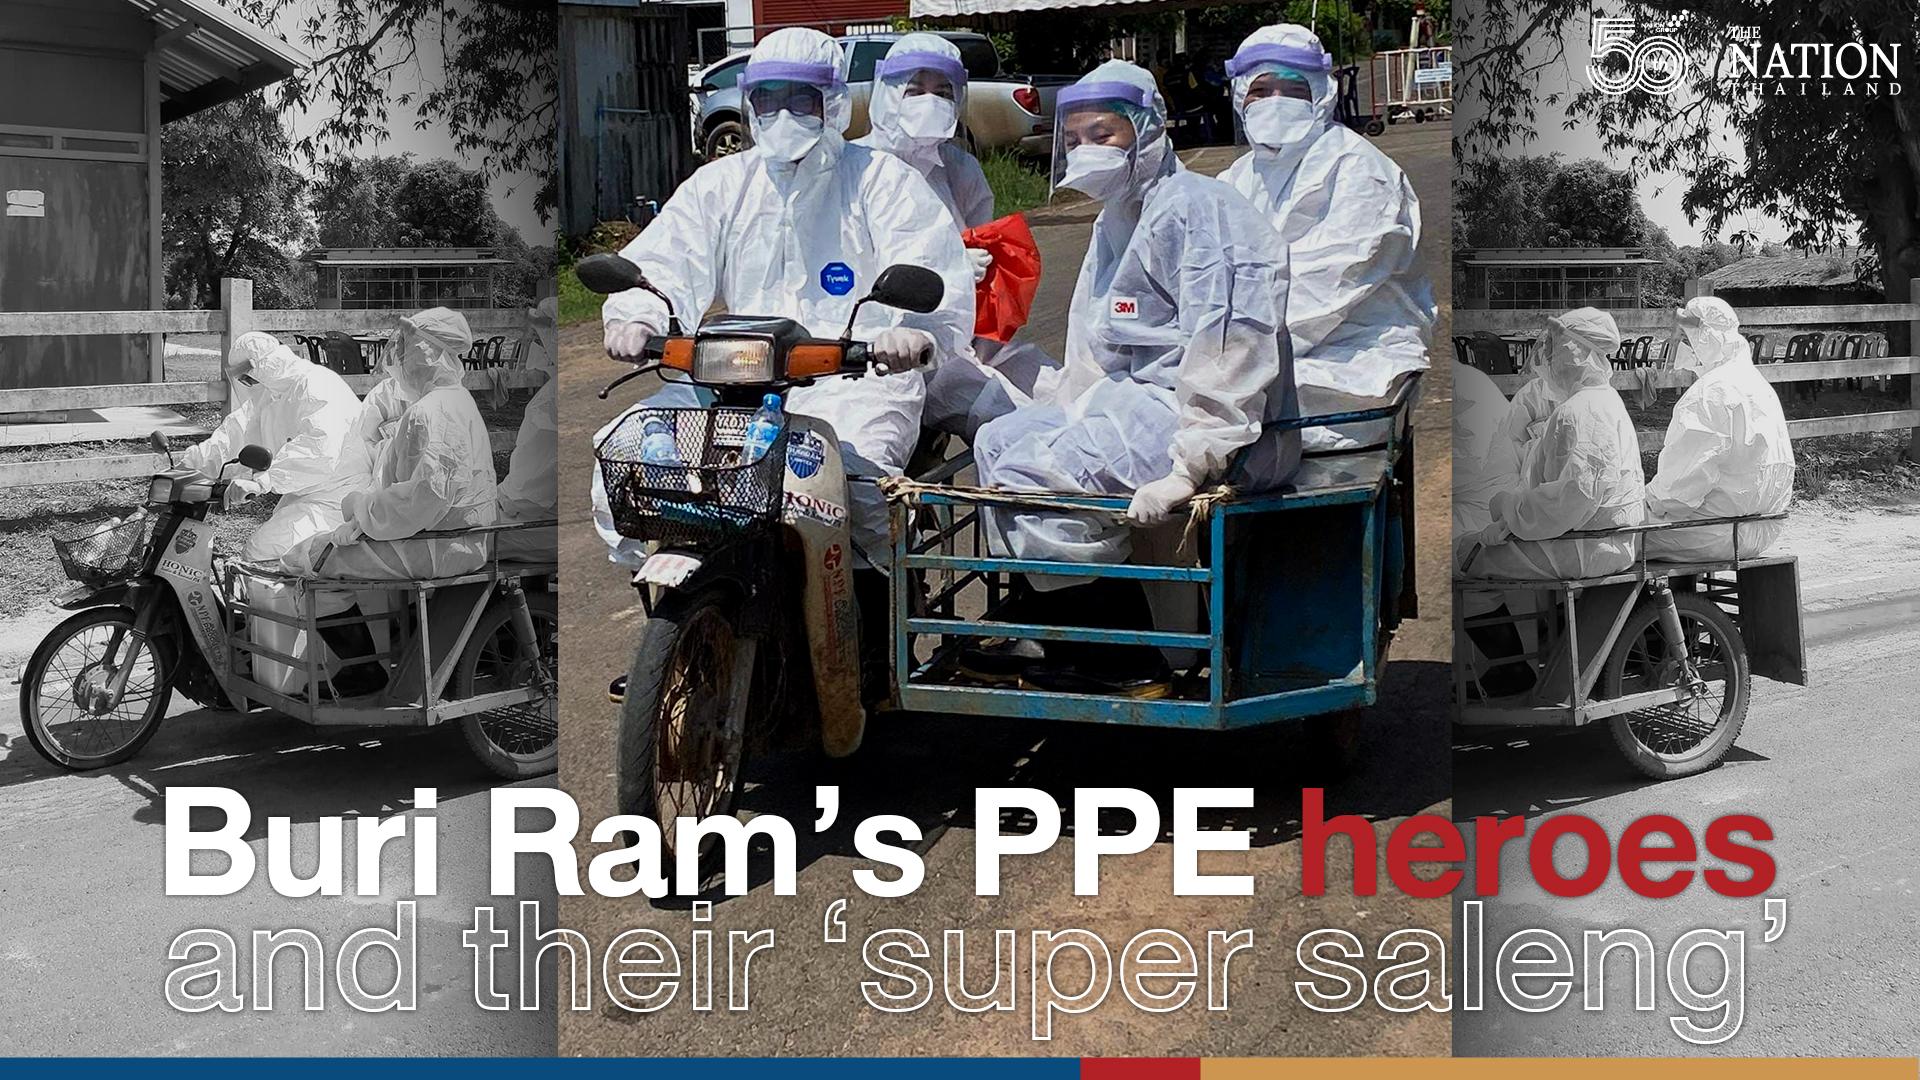 Buri Ram’s PPE heroes and their ‘super saleng’